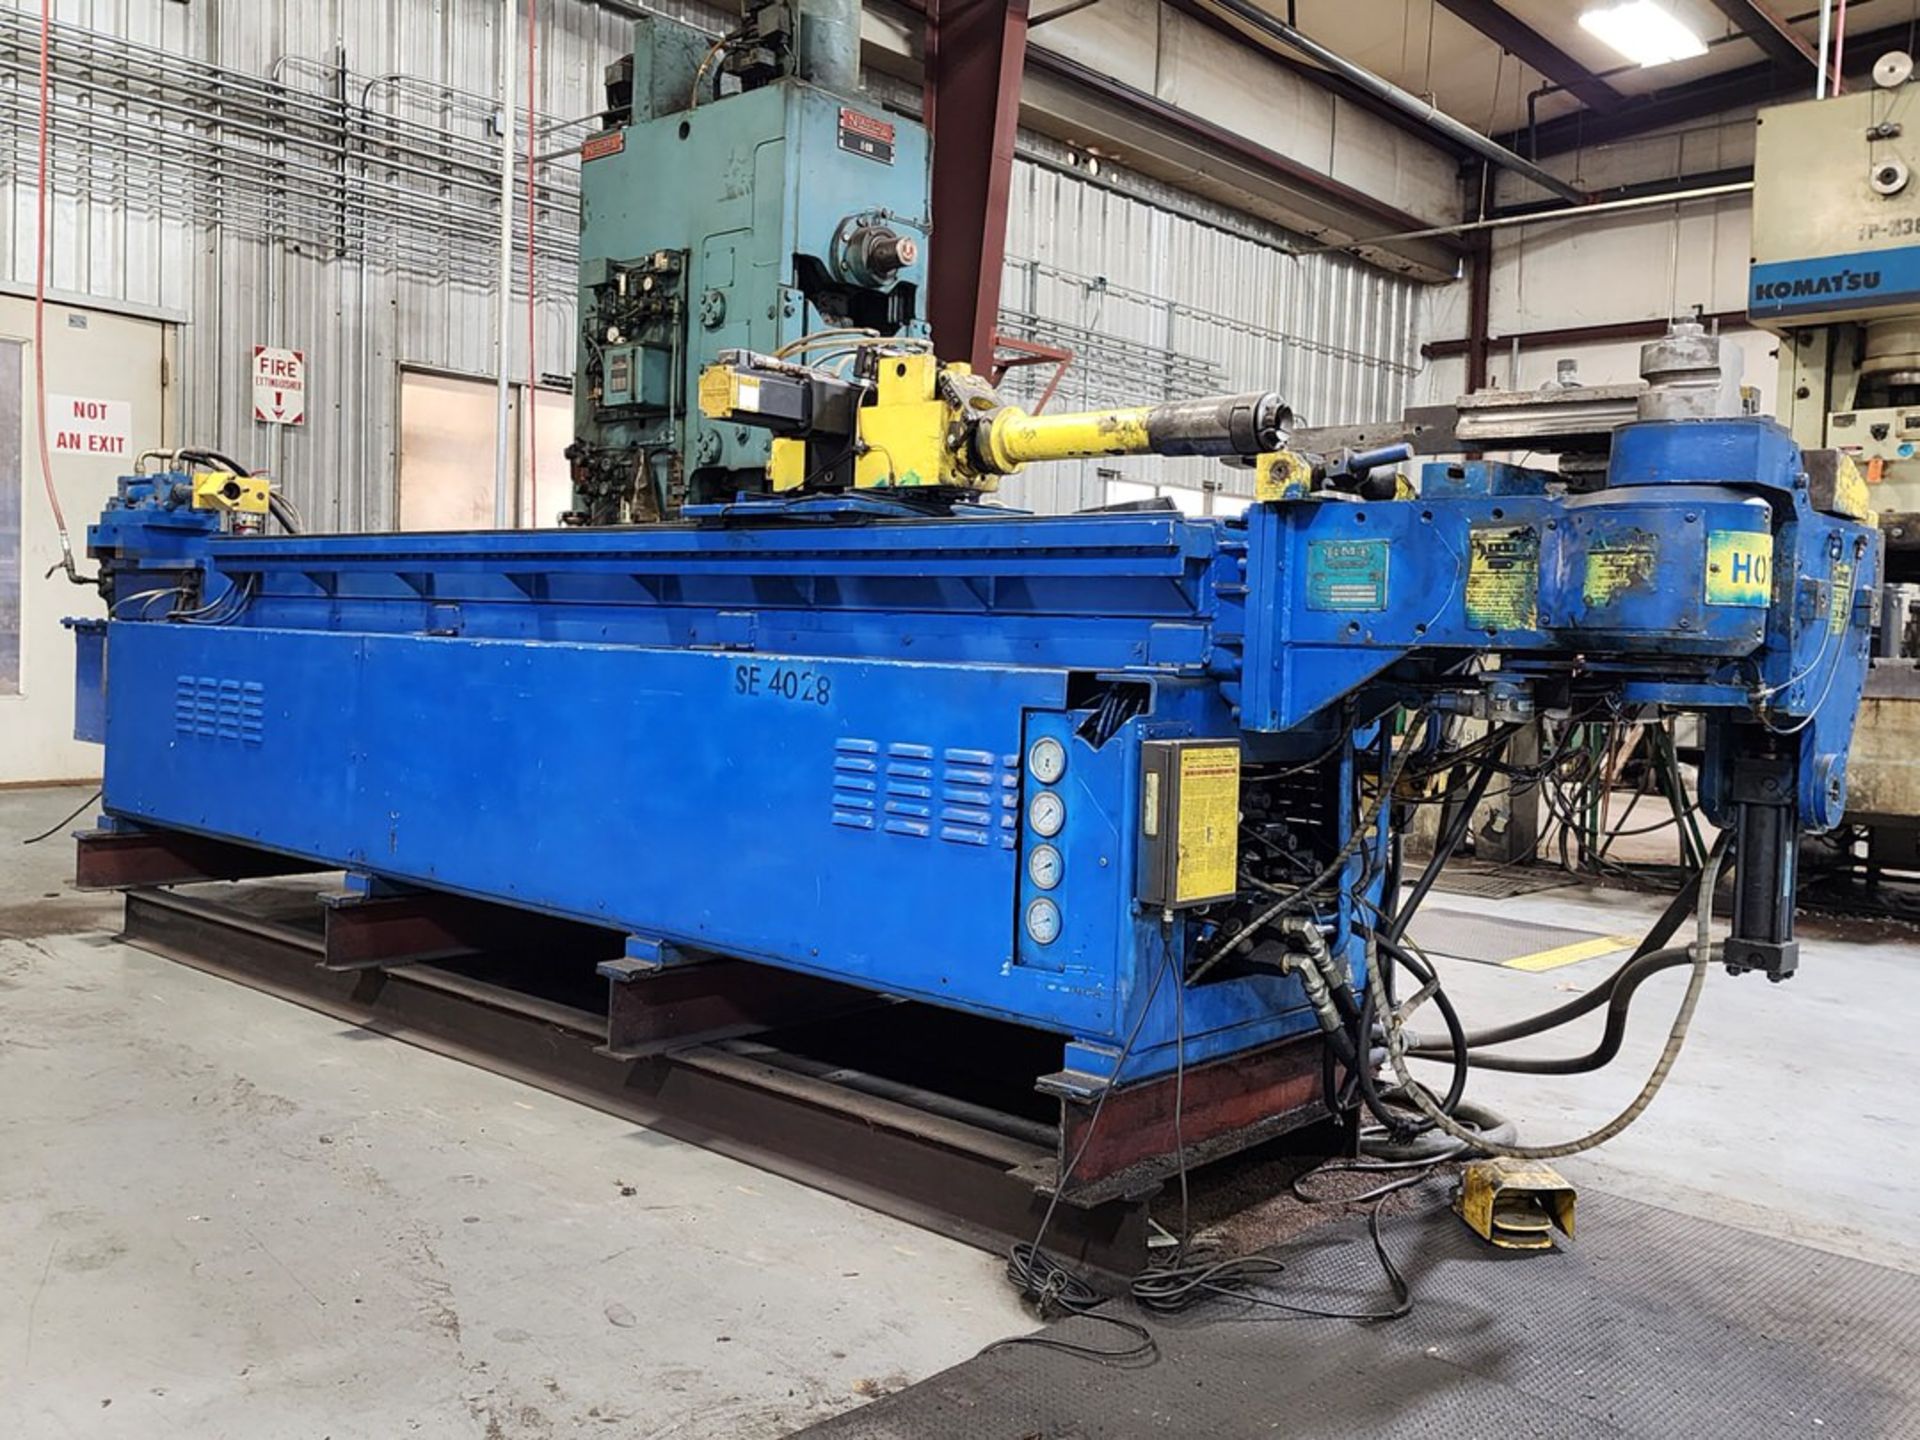 Horn CNC Hyd Tube Bender 1.5"; W/ Controller, DOM: 2006 - Image 3 of 15